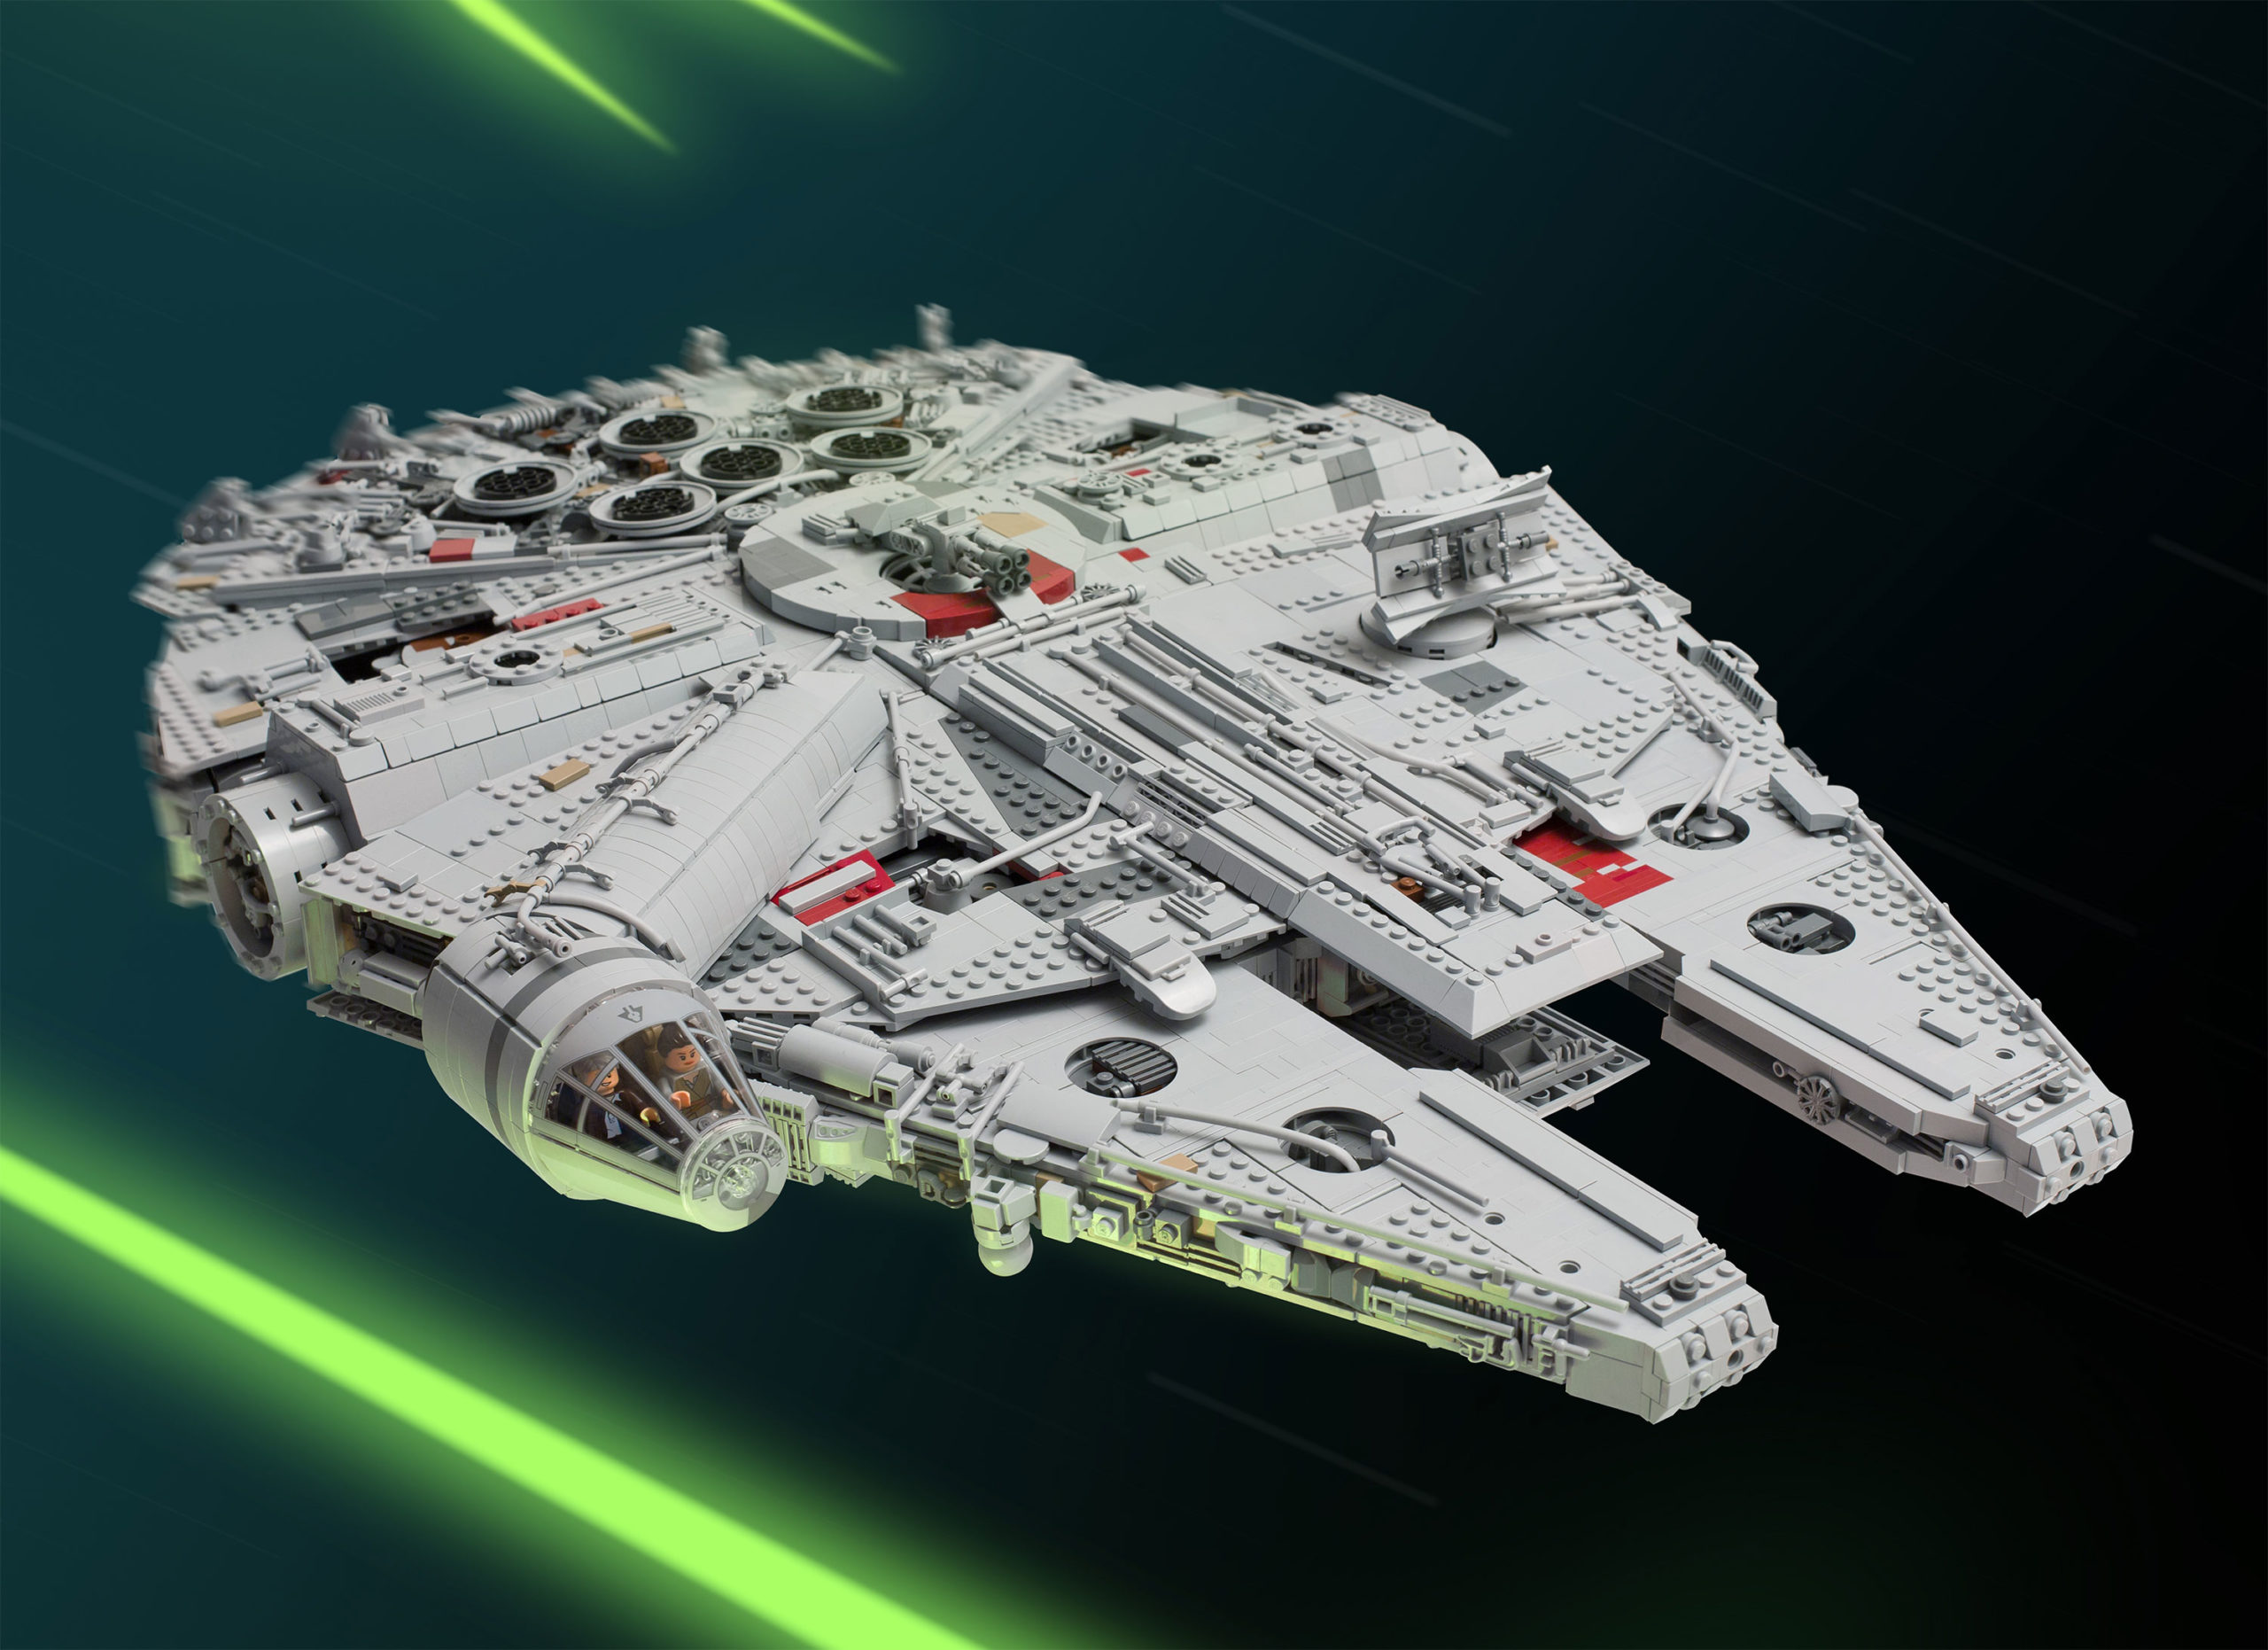 Star Wars Fan Spends A Year Building The Best LEGO Millennium Falcon Ever